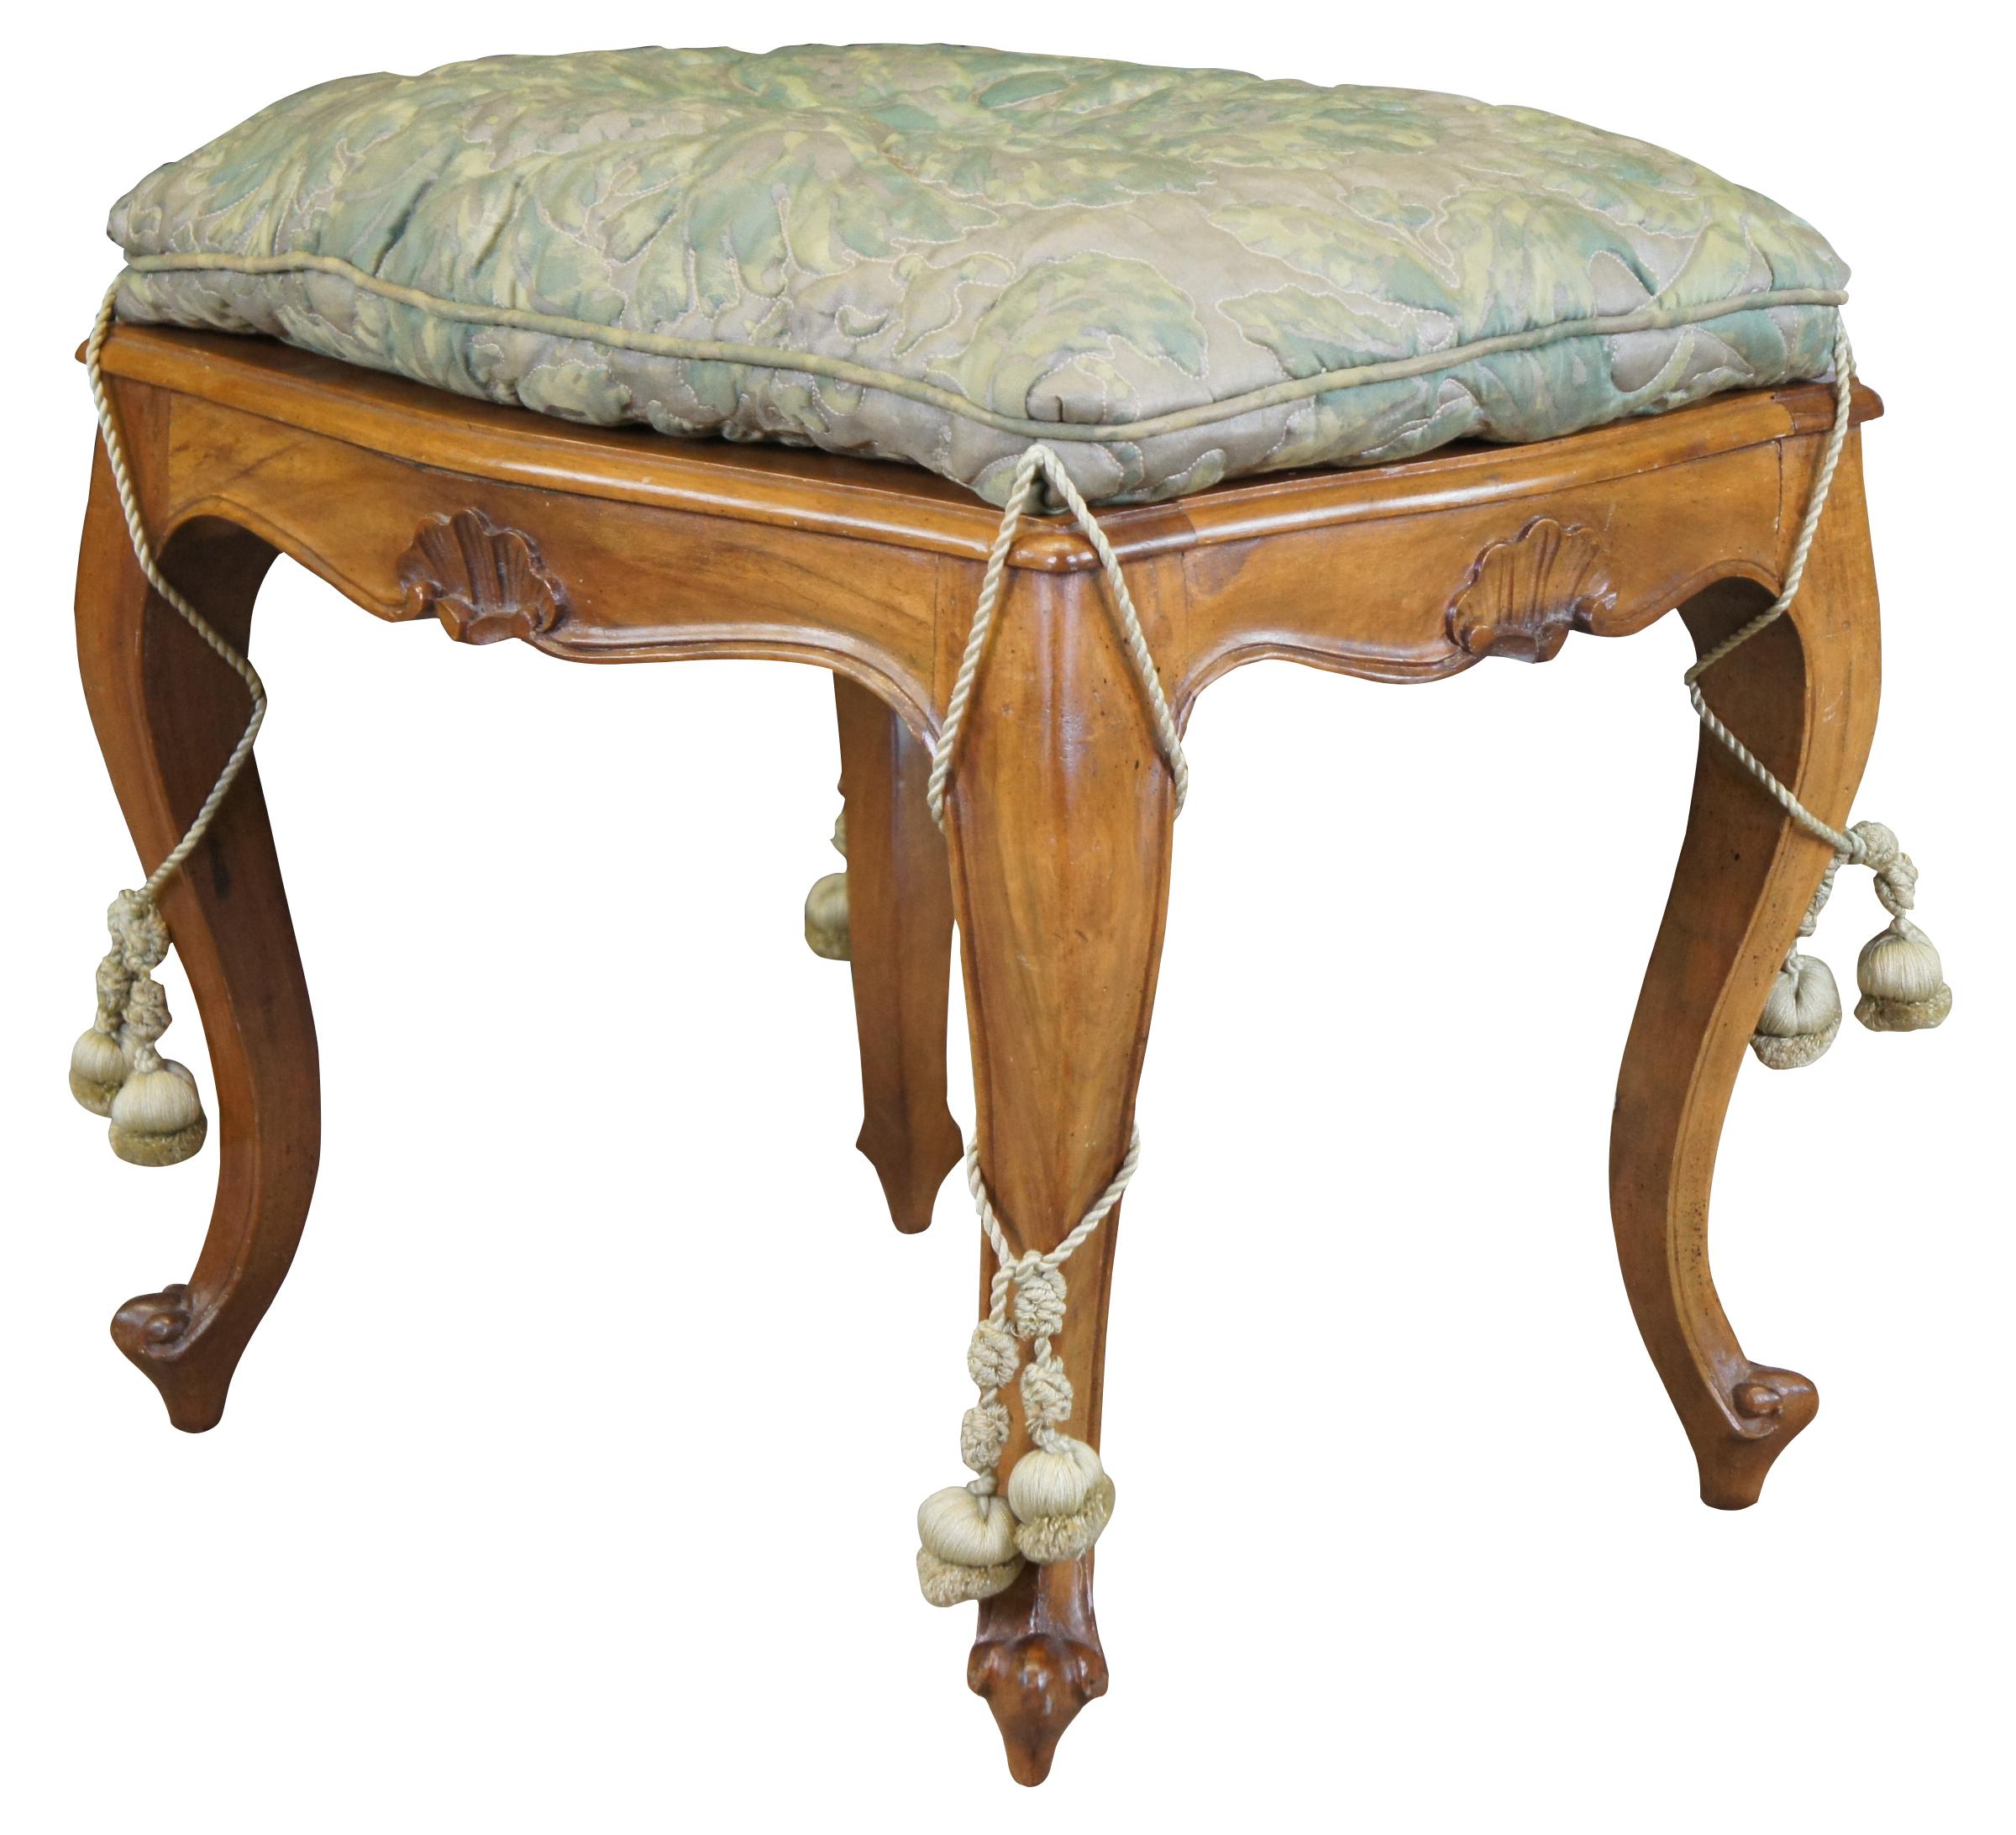 Vintage Italian Louis XV style bench seat, foot stool, ottoman or pouf. Made of walnut featuring serpentine form with caned seat, shell accents and cabriole legs. Includes upholstered cushion with tassels. Made in Italy.
 